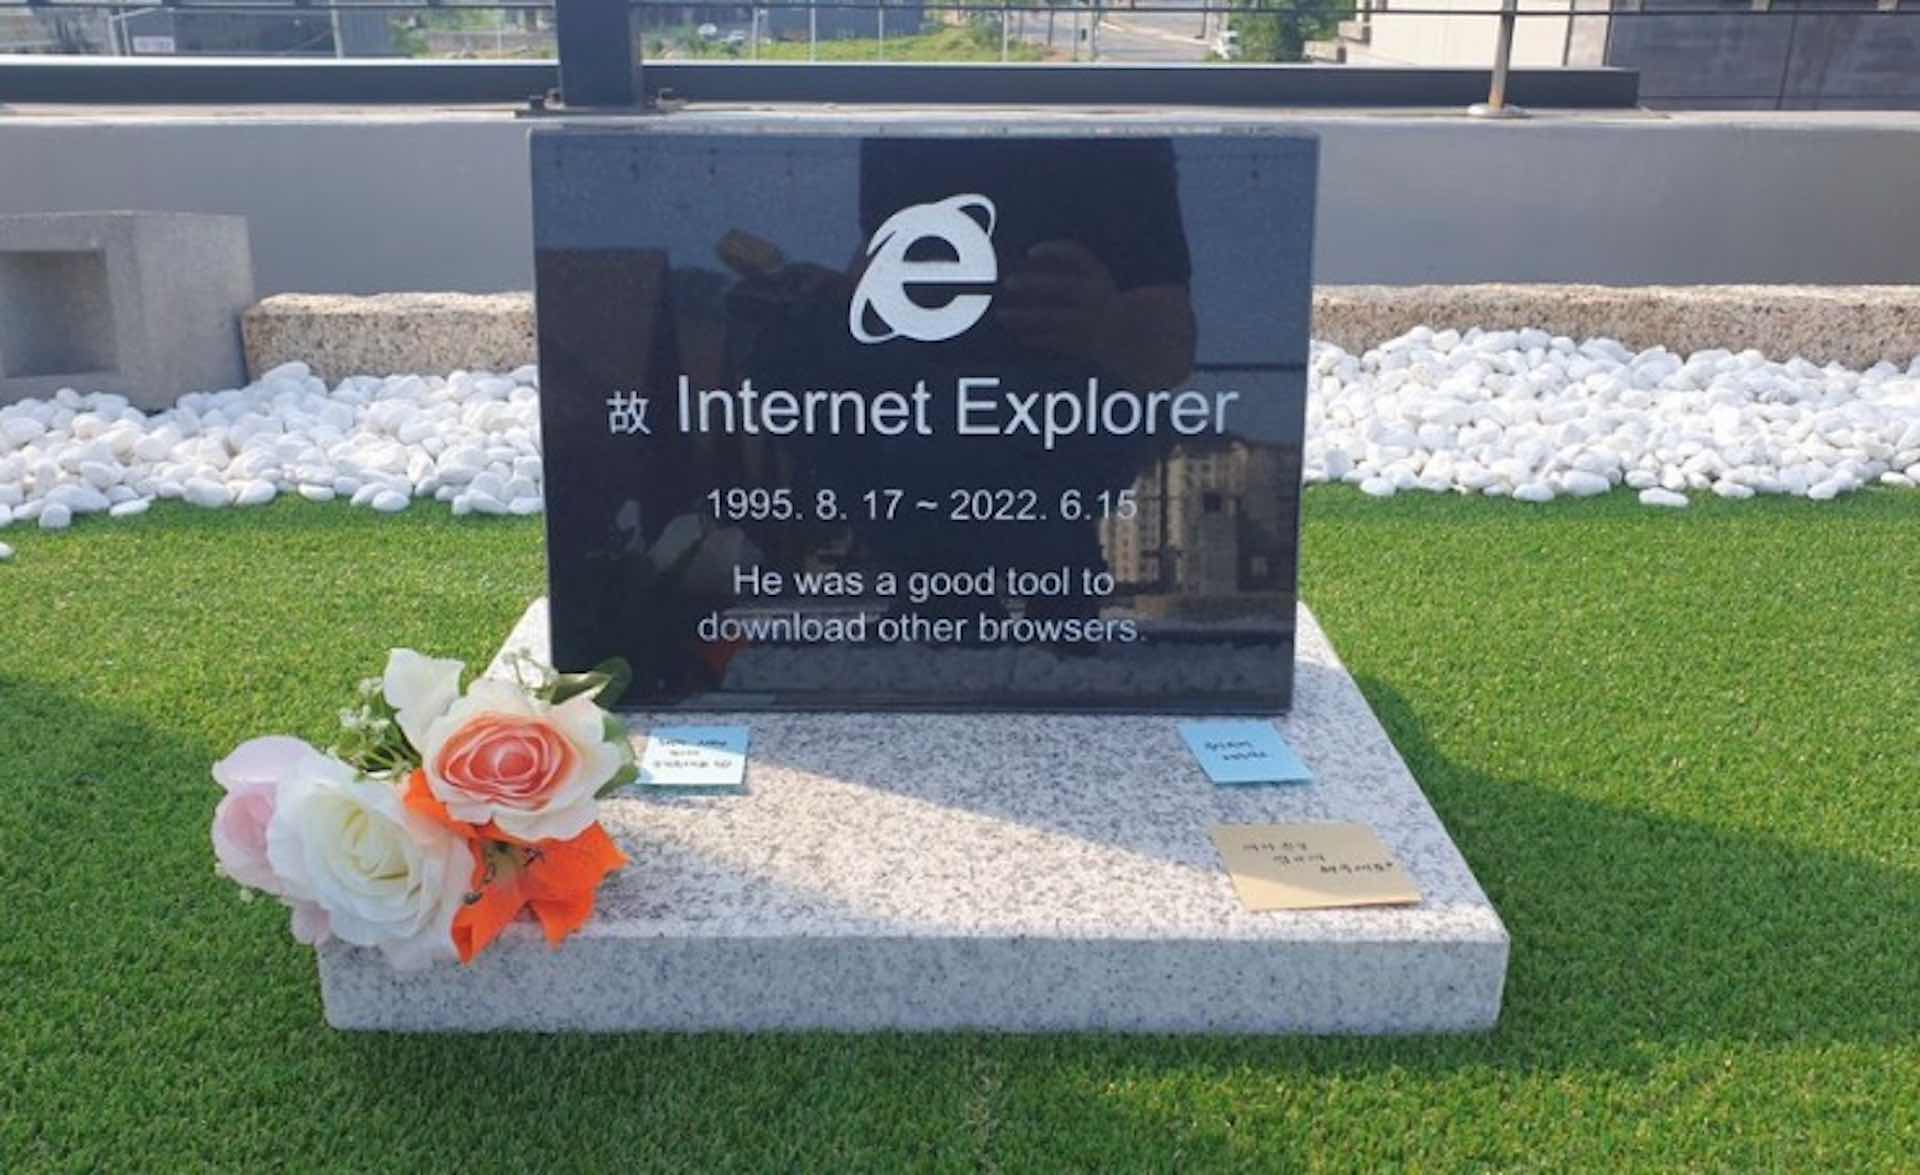 In South Korea, a gravestone for Internet Explorer has become viral